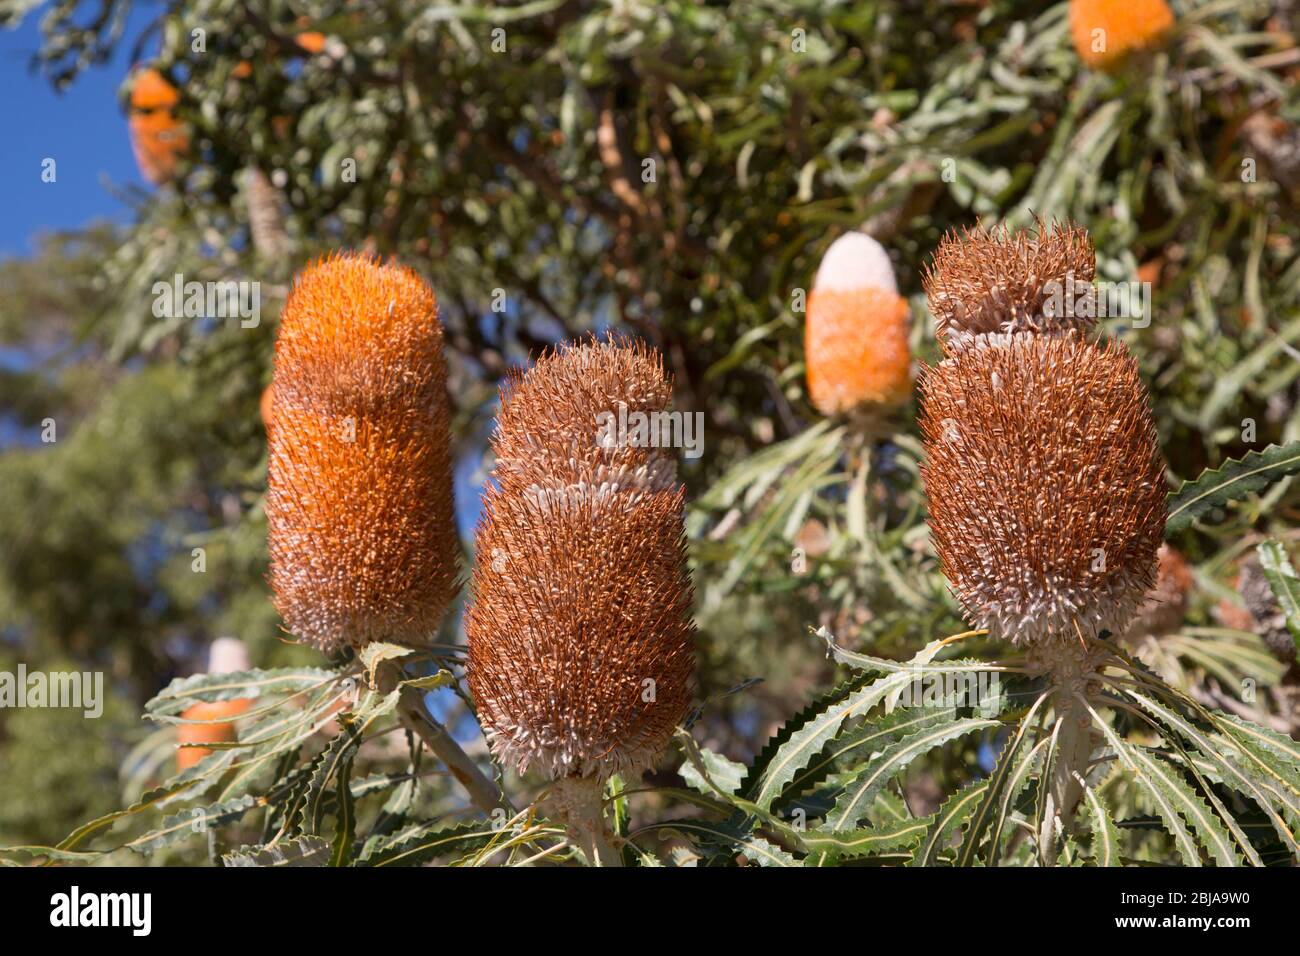 A Banksia Tree blooming with beautiful flowers. Stock Photo